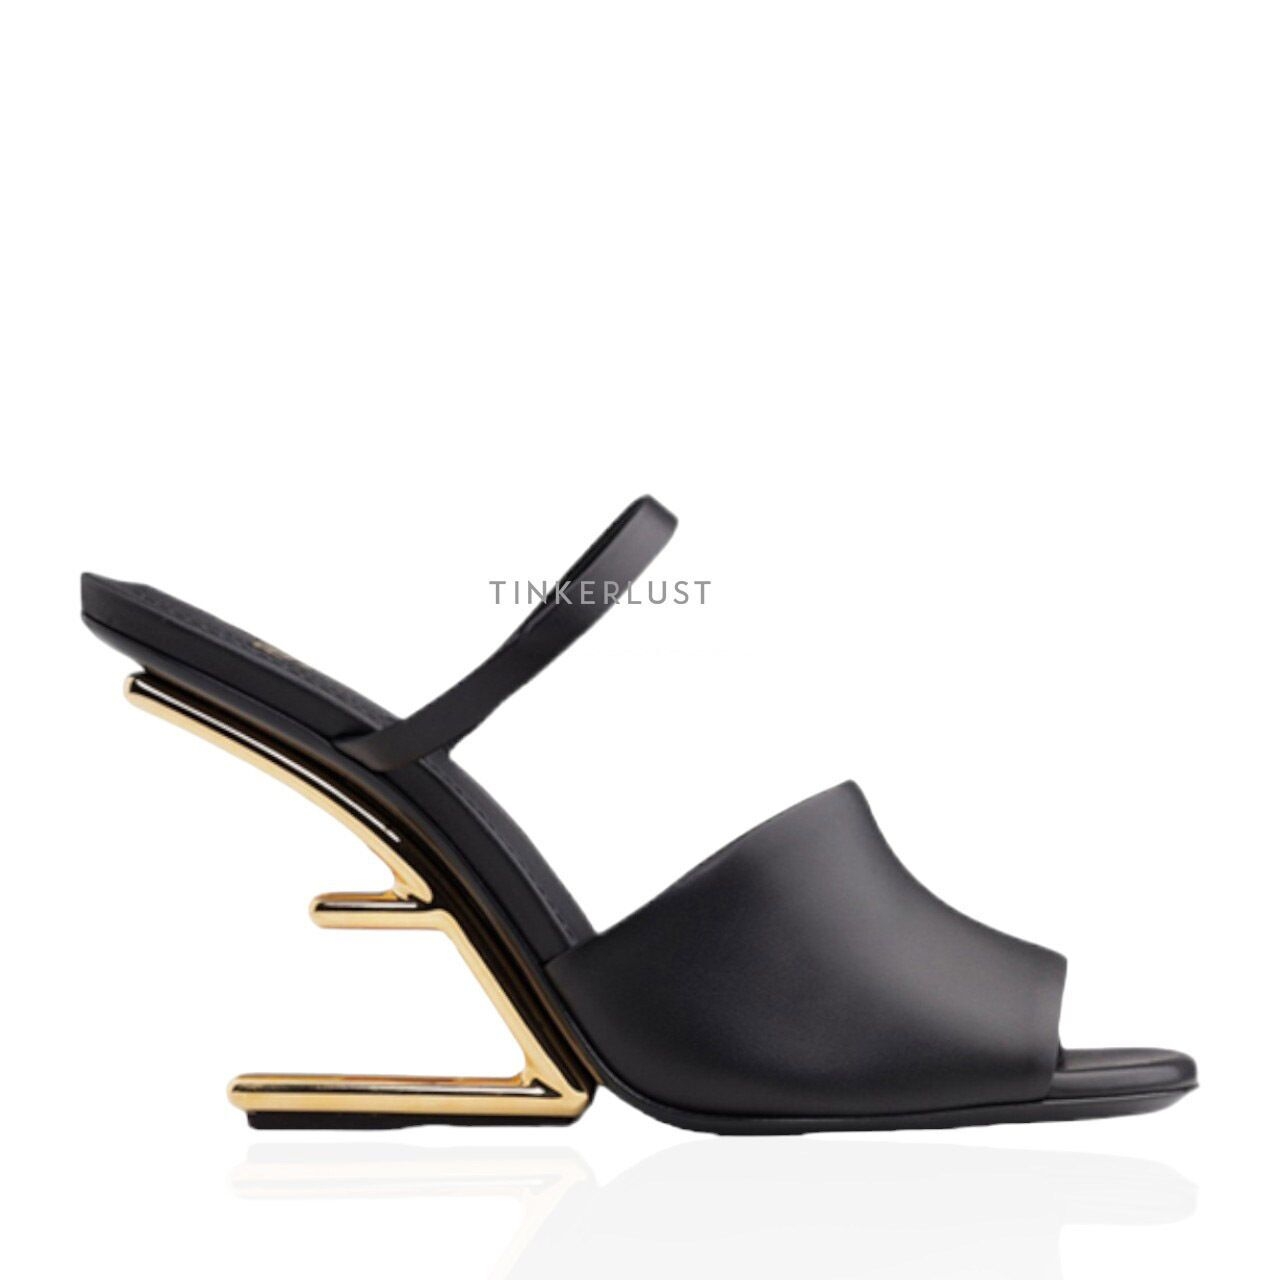 Fendi Women First Open Toe Sandals 65mm in Black Leather with Diagonal F-Shaped Heels